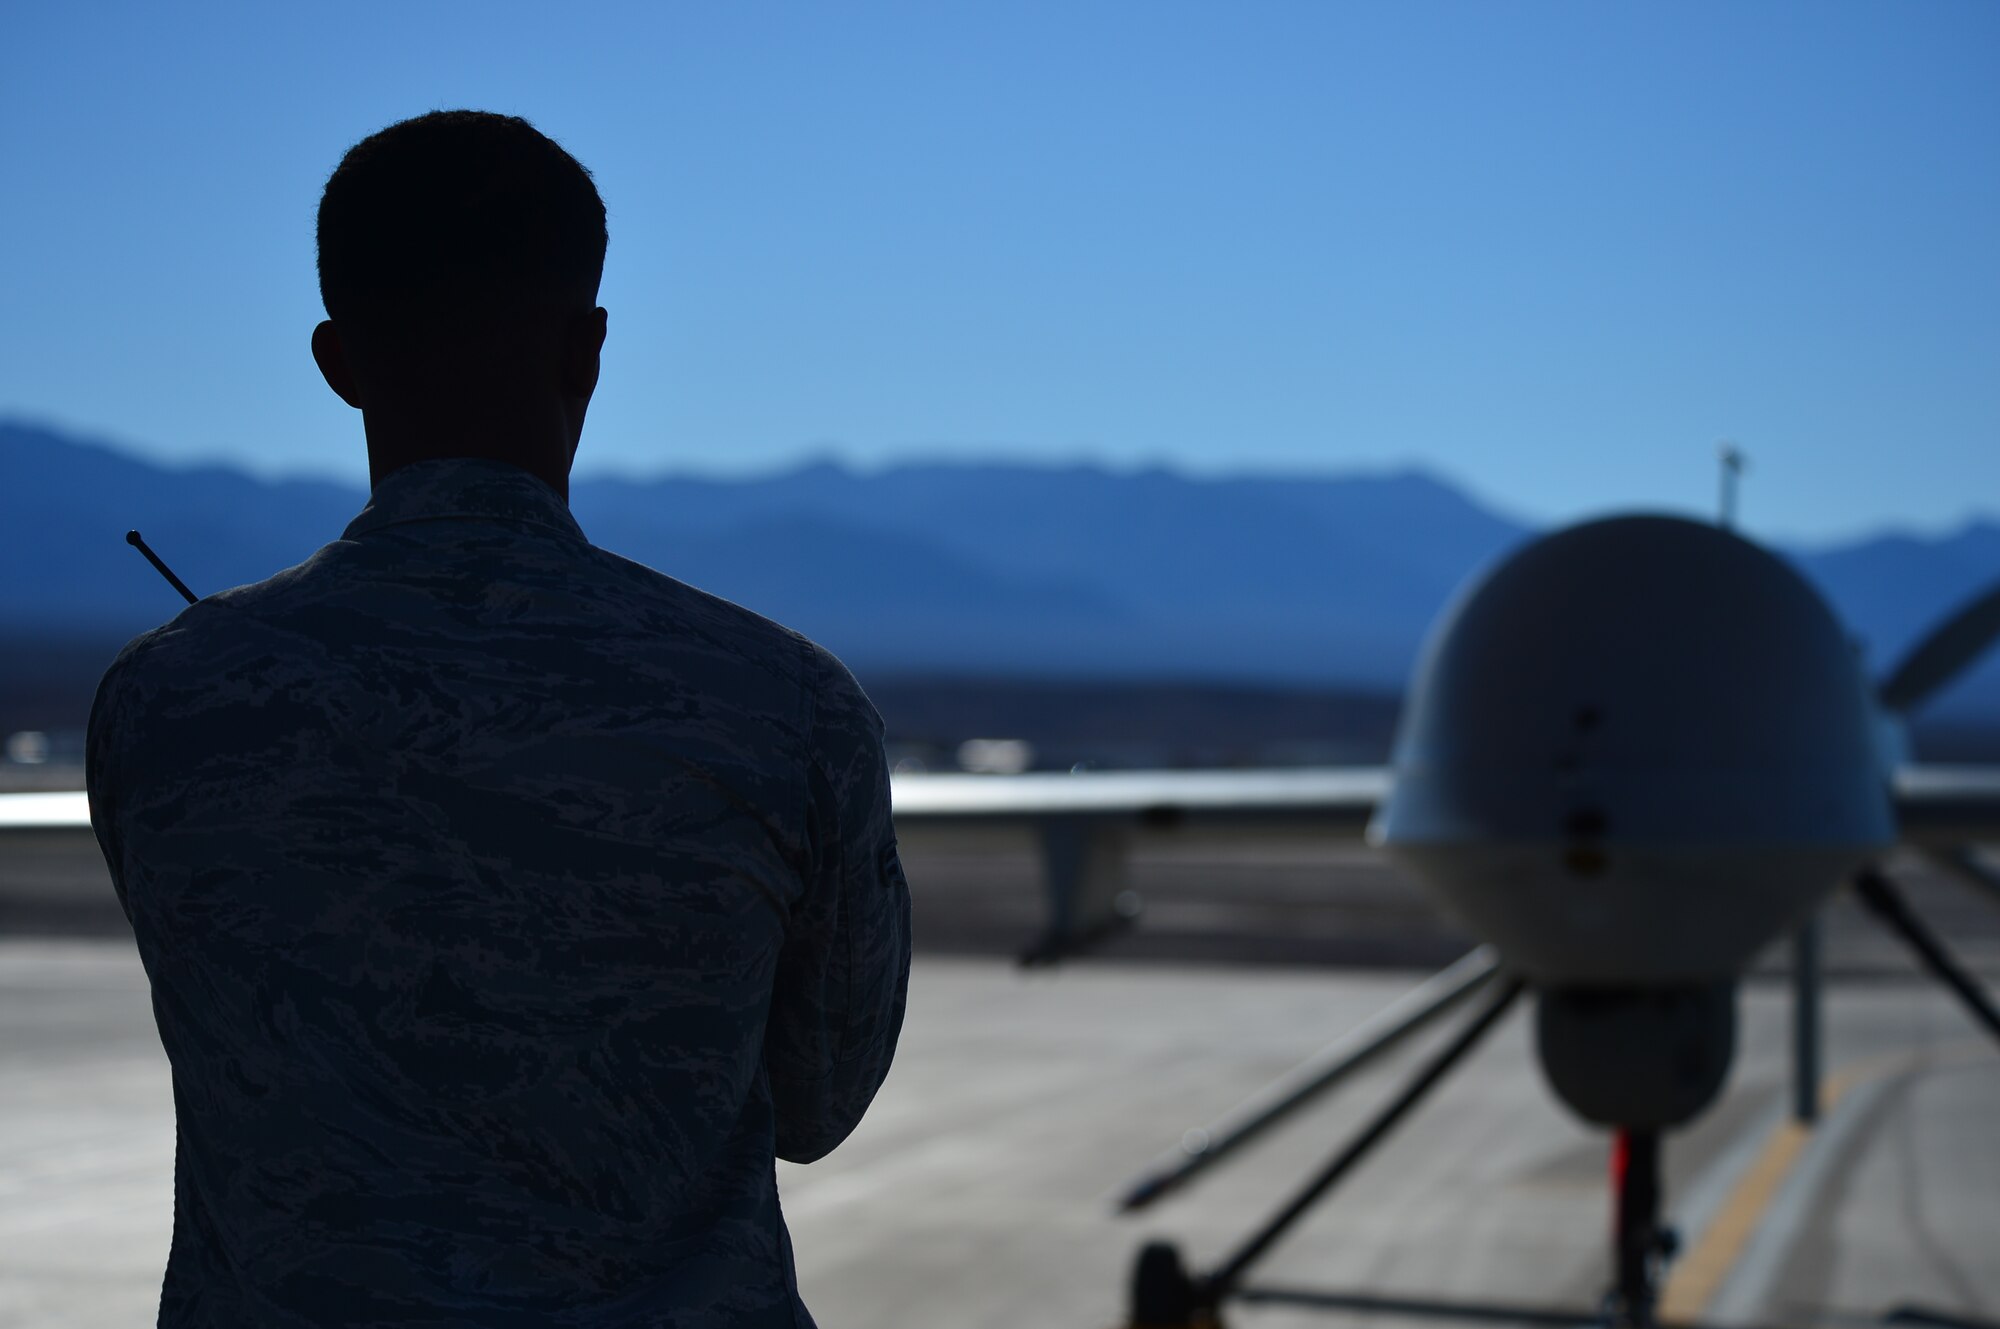 LAS VEGAS, Nev -- A crew chief from the 432nd Aircraft Maintenance Squadron taxis in an MQ-1 Predator remotely piloted aircraft during a post-flight inspection Nov. 1, 2013. The MQ-1 Predator is an armed, multi-mission, medium-altitude, long-endurance RPA that is employed primarily as an intelligence-collection asset and secondarily against dynamic execution targets. The USAF’s MQ-9 Reaper and MQ-1 Predator fleet surpassed 2 million cumulative flight hours on Oct. 22, 2013. (U.S. Air Force photo by Staff Sgt. N.B./released)